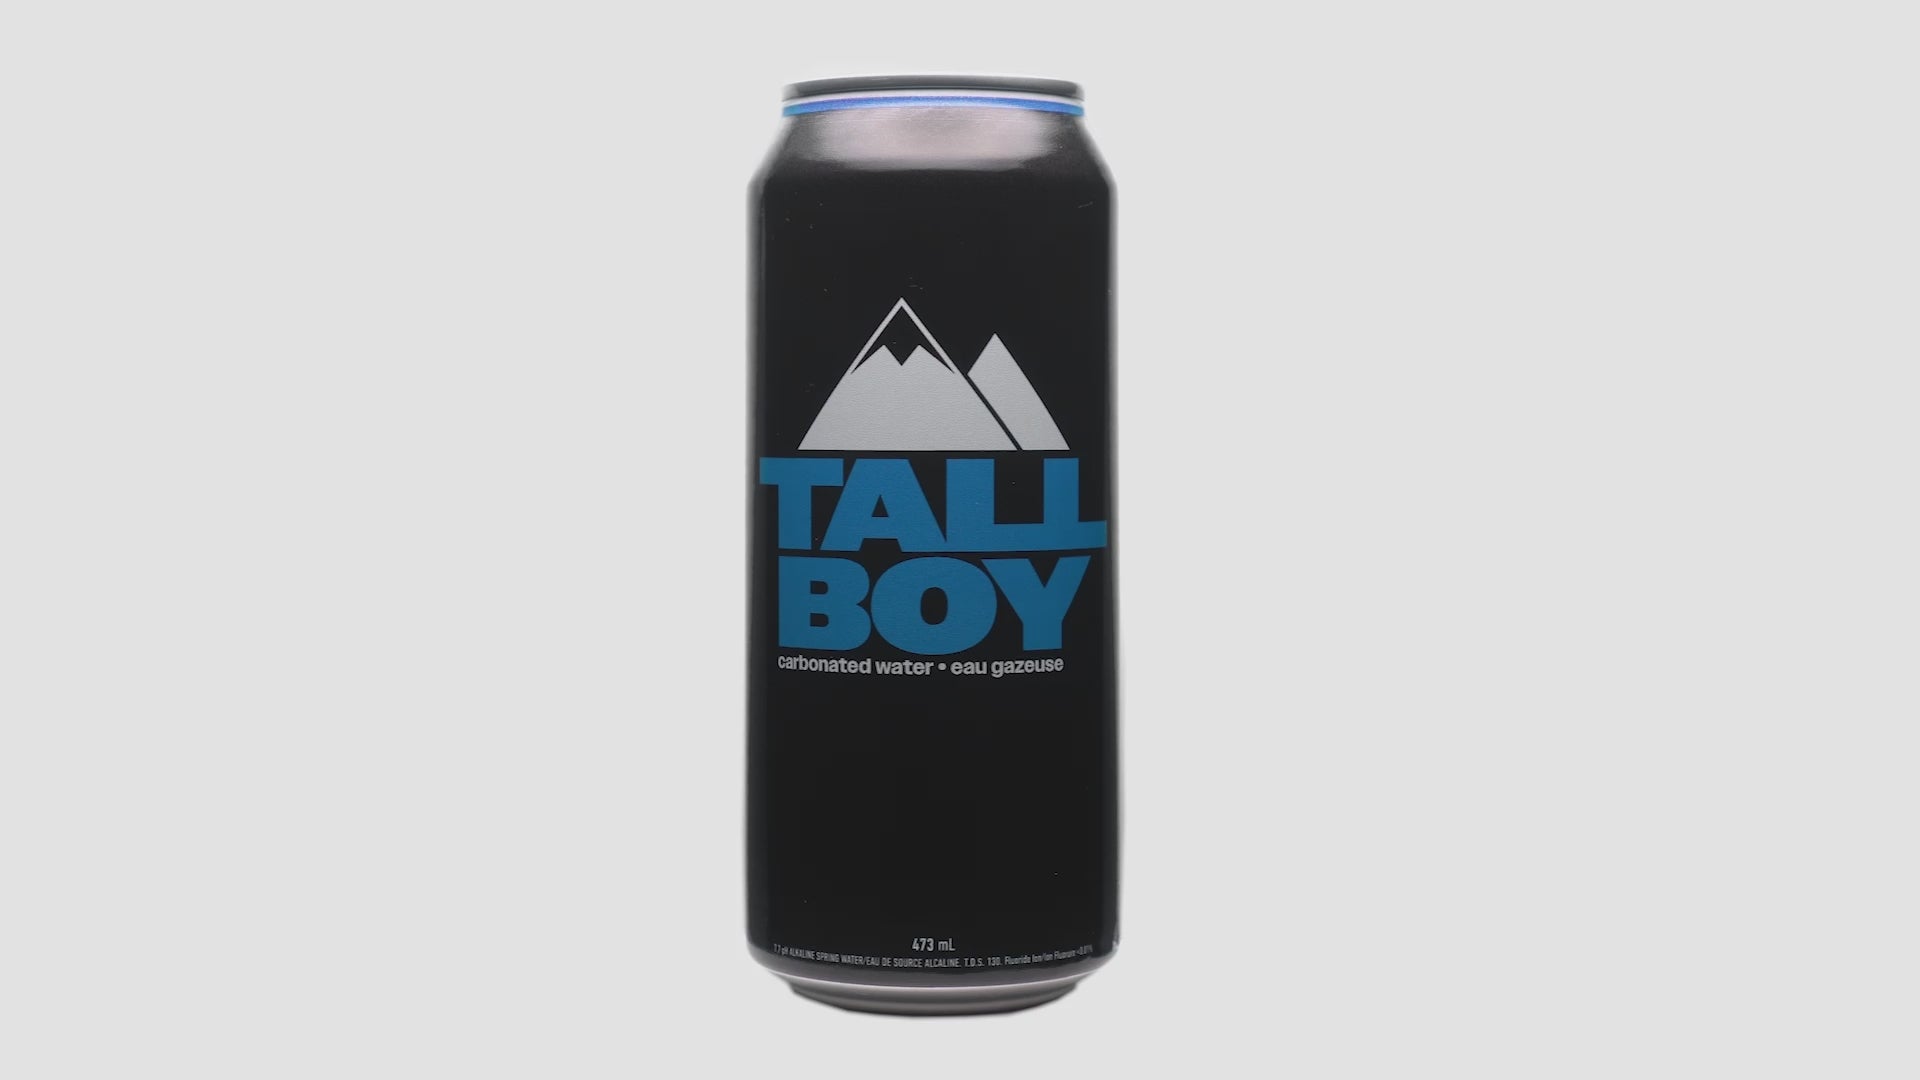 Video of Tall Boy can spinning on a loop.